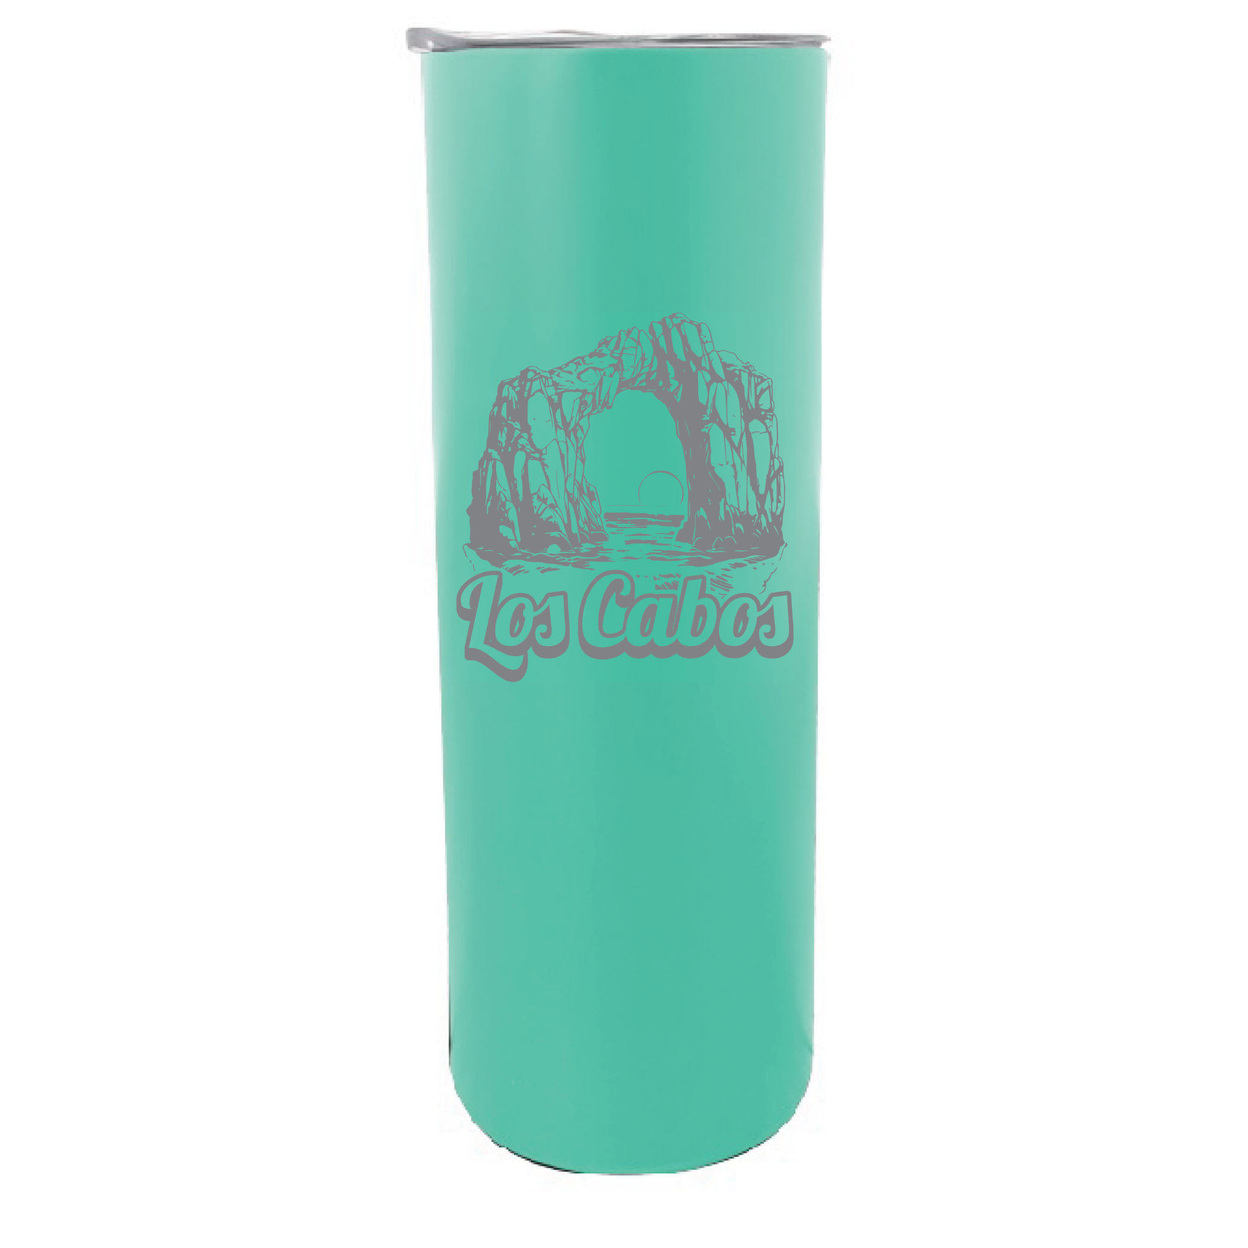 Los Cabos Mexico Souvenir 20 Oz Engraved Insulated Stainless Steel Skinny Tumbler - Black Glitter,,4-Pack